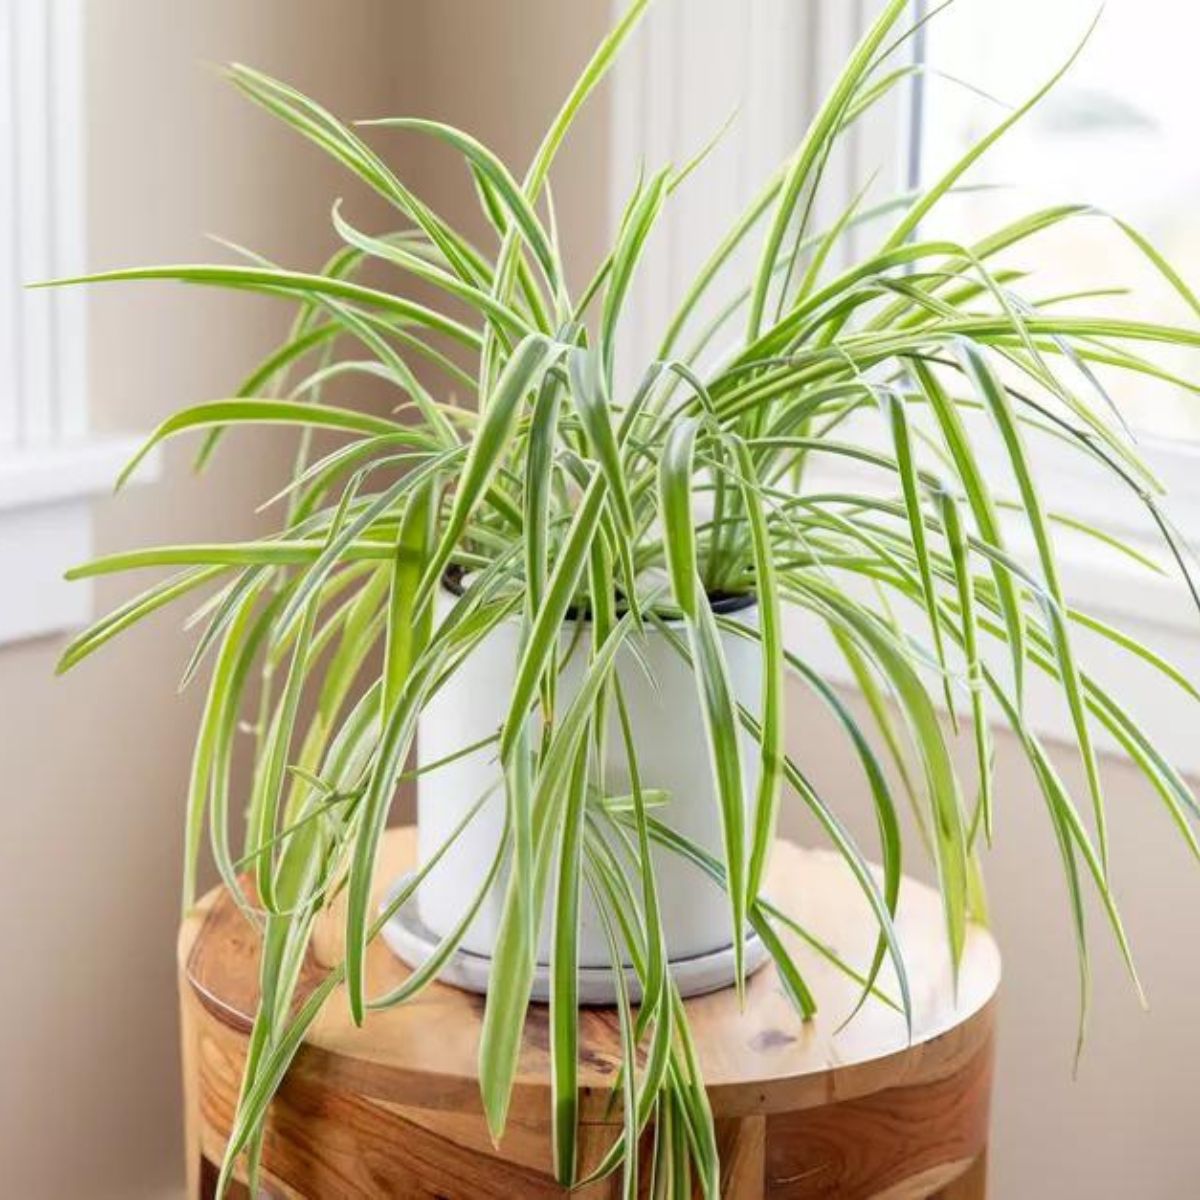 Spider plant featured on Thursd